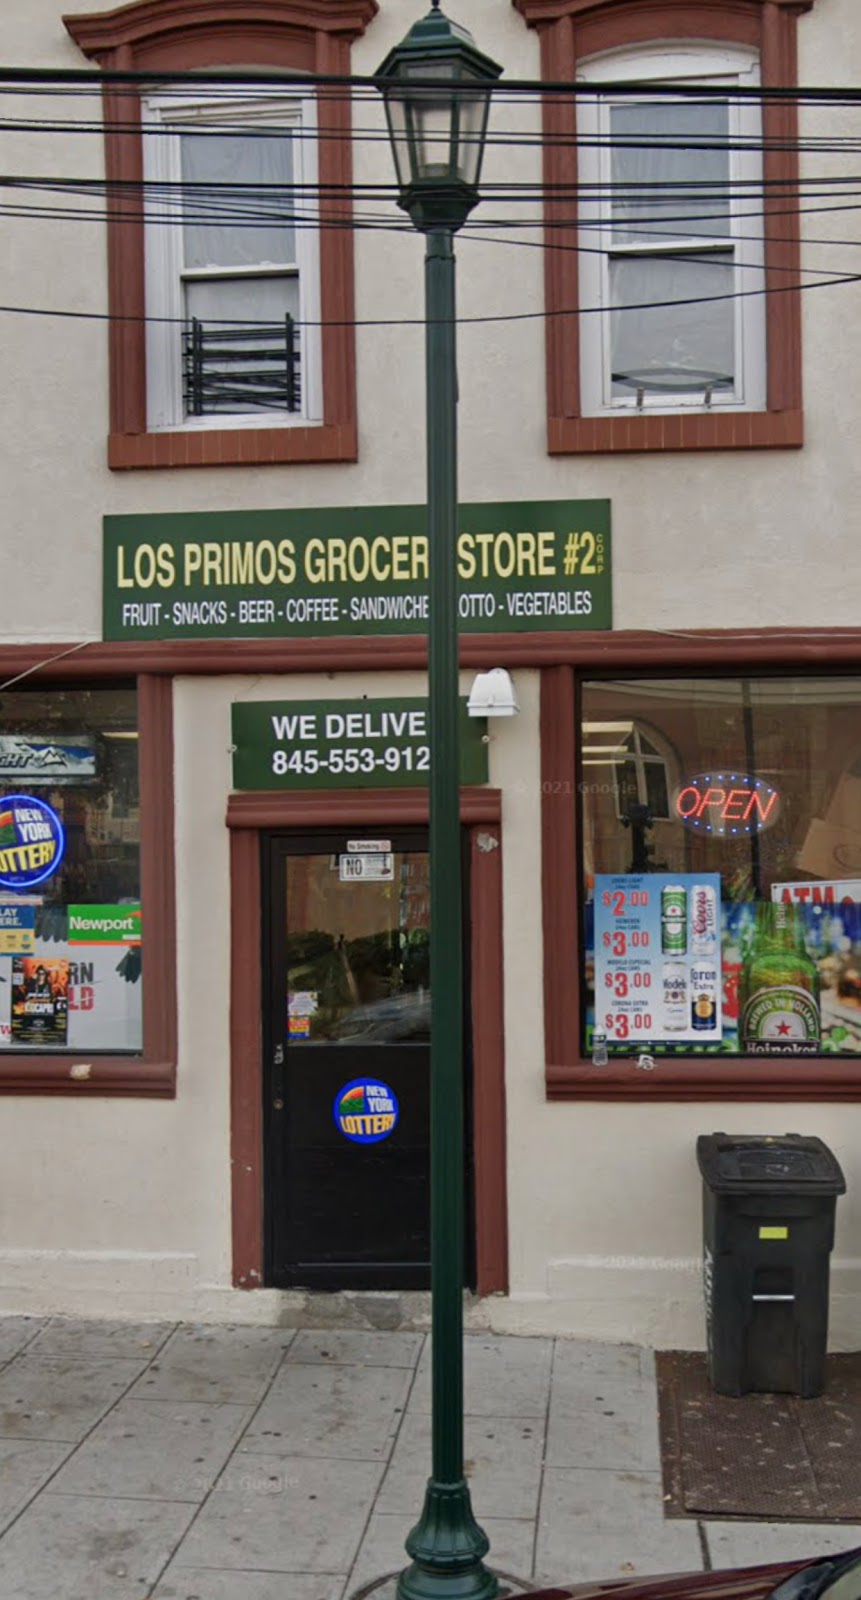 Los primos grocery store #2 | 72 Main St, Haverstraw, NY 10927 | Phone: (845) 553-9121